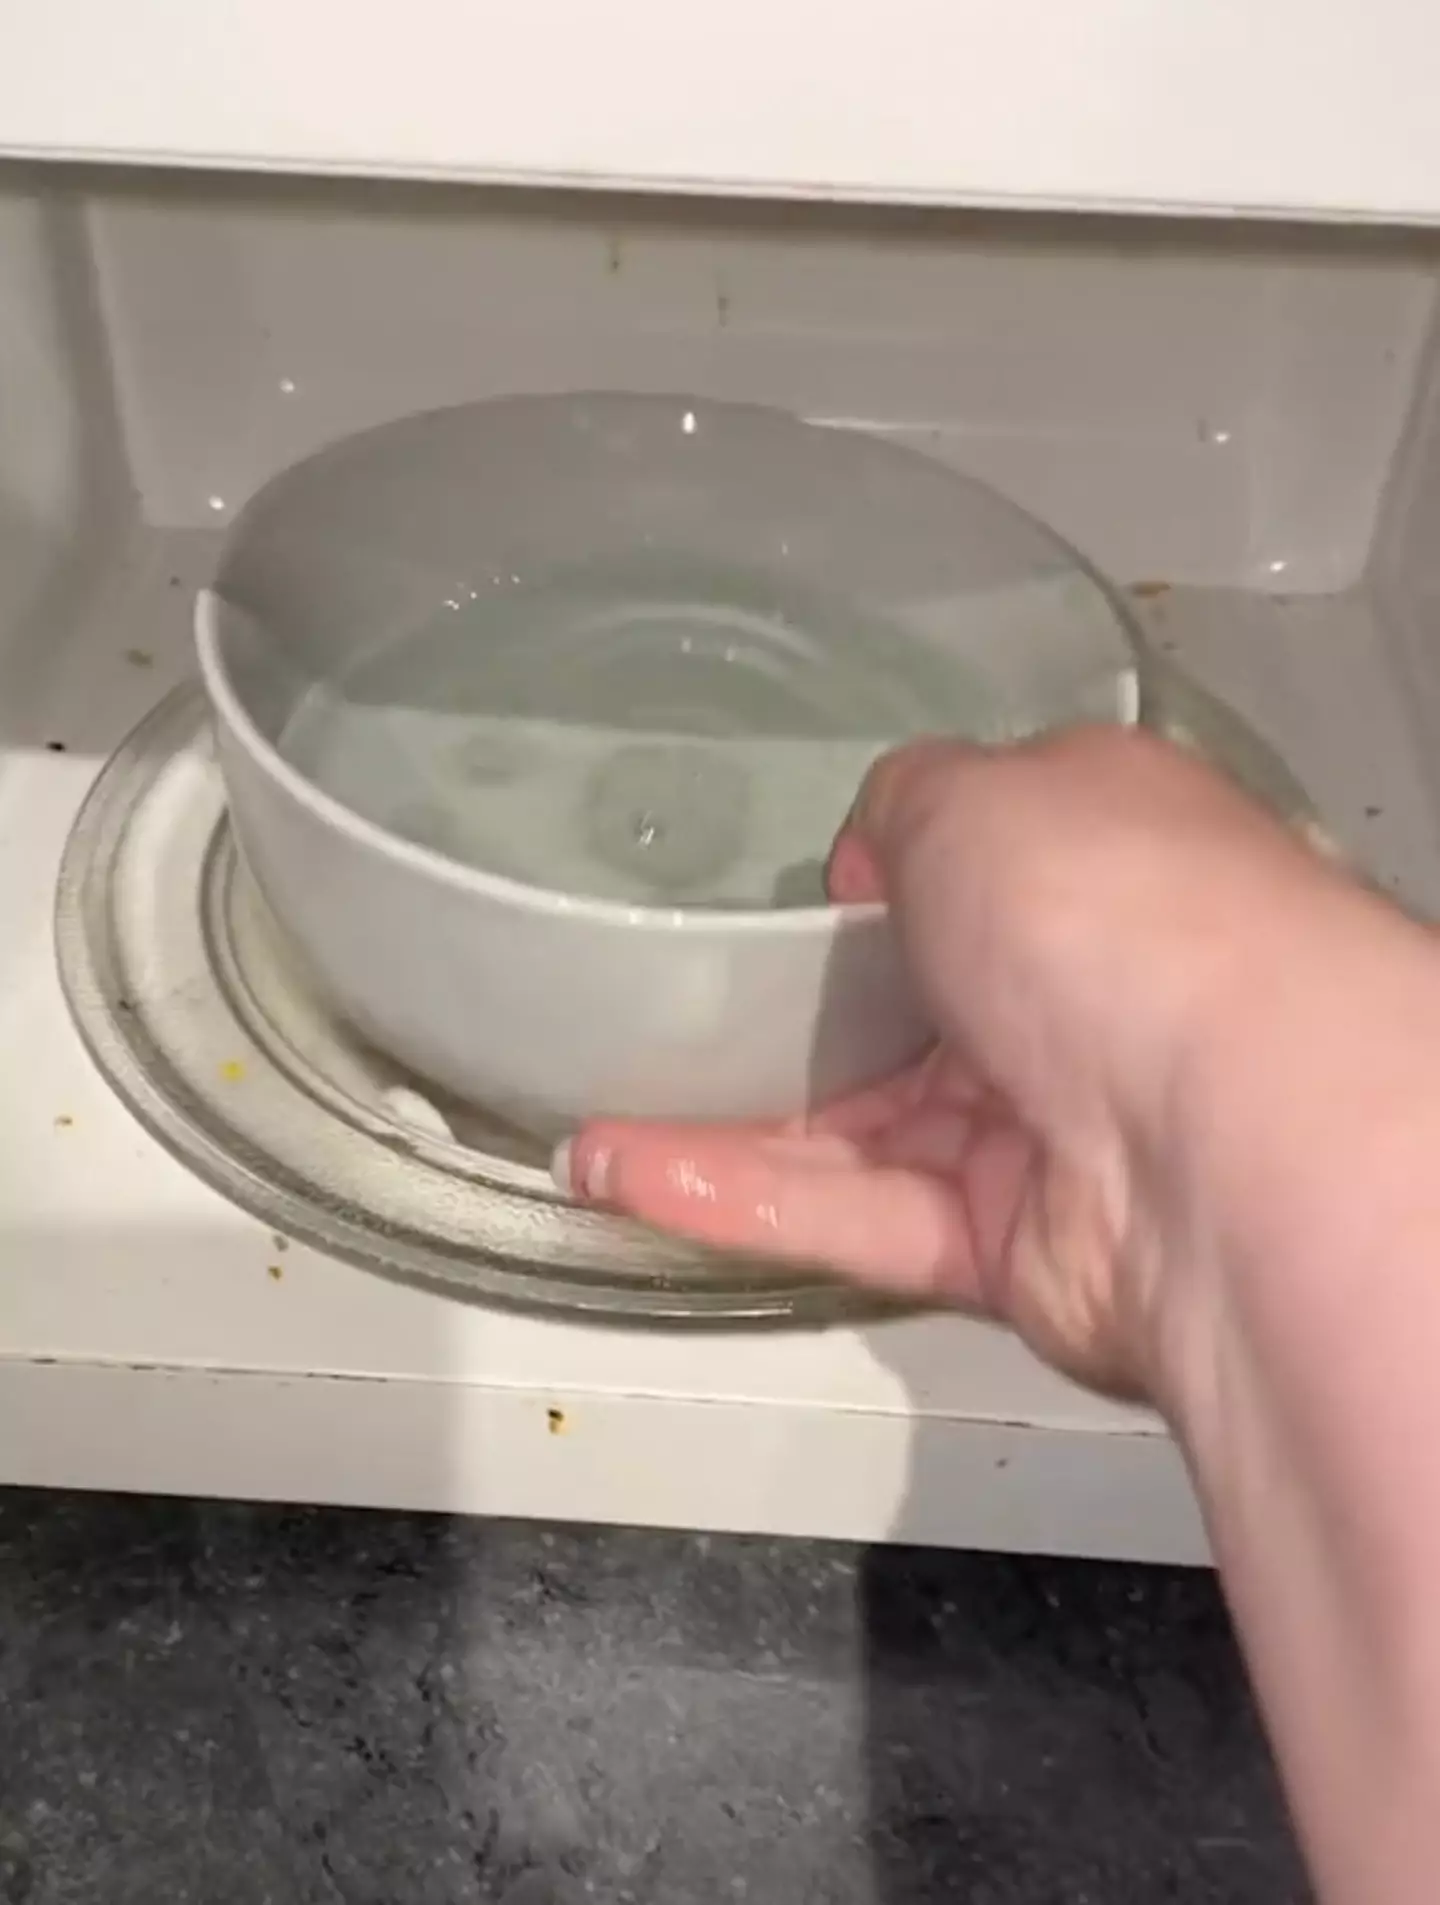 In the bowl of water goes.